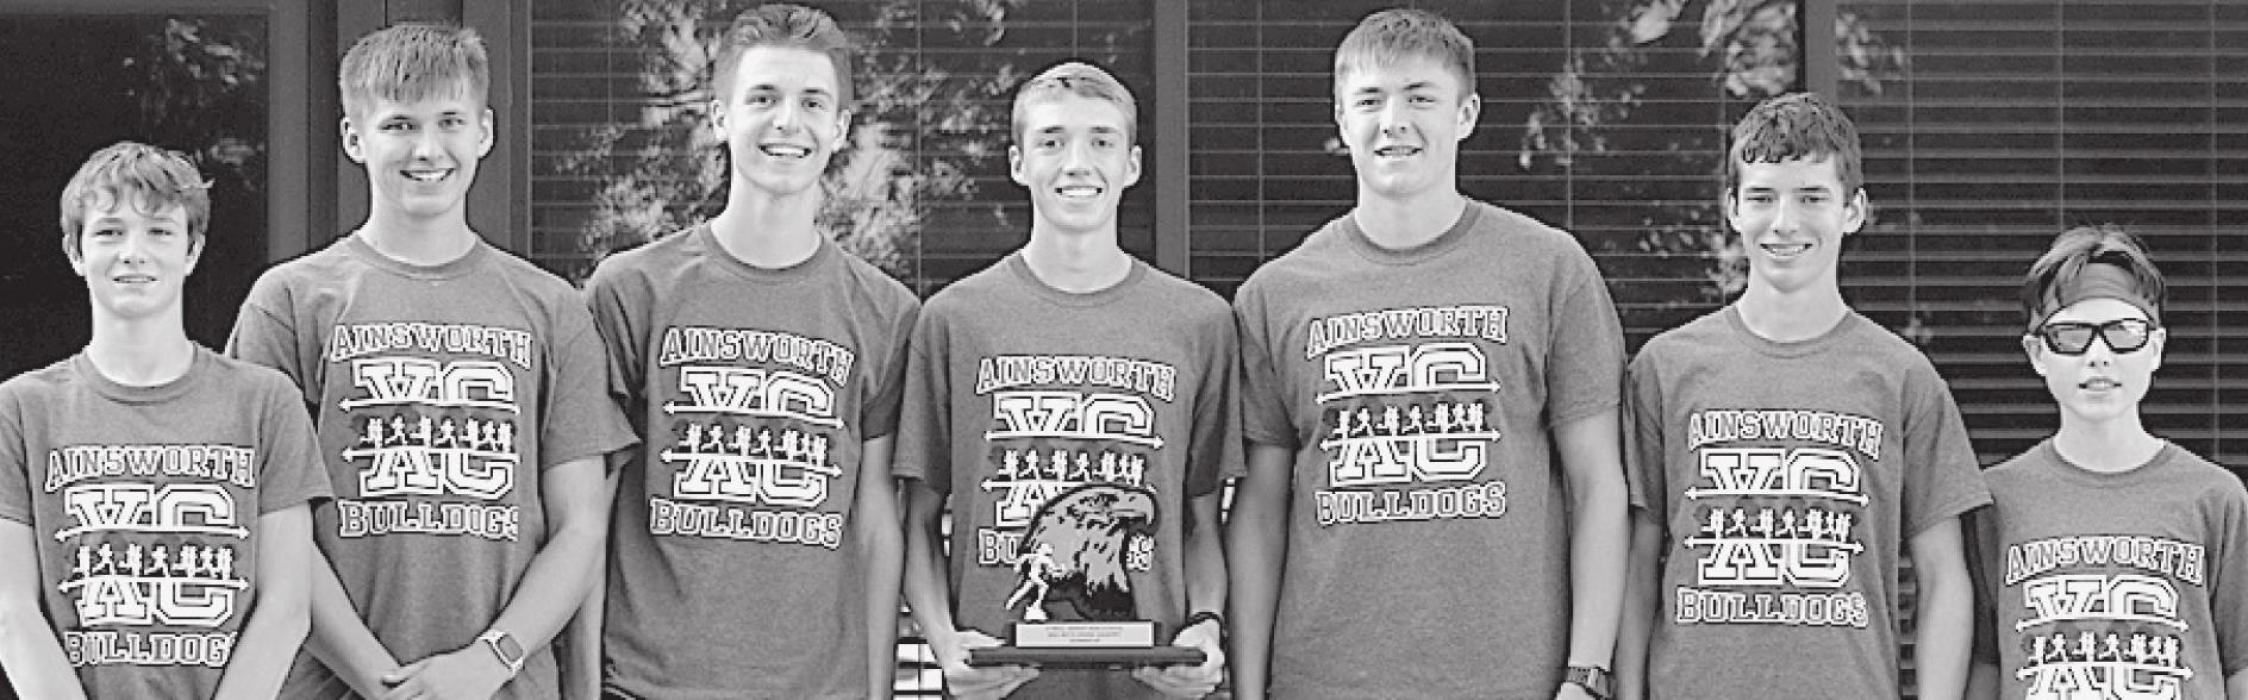 The Ainsworth Boys Cross Country team captured second place at the O’Neill Invitational. Team members were (left to right) Logan Schroedl, Tommy Ortner, Ben Flynn, Ty Schlueter, Trey Appelt, Corbin Swanson and Daniel Cole. Not Pictured - Atley Titus. Photo by Debb Gracey